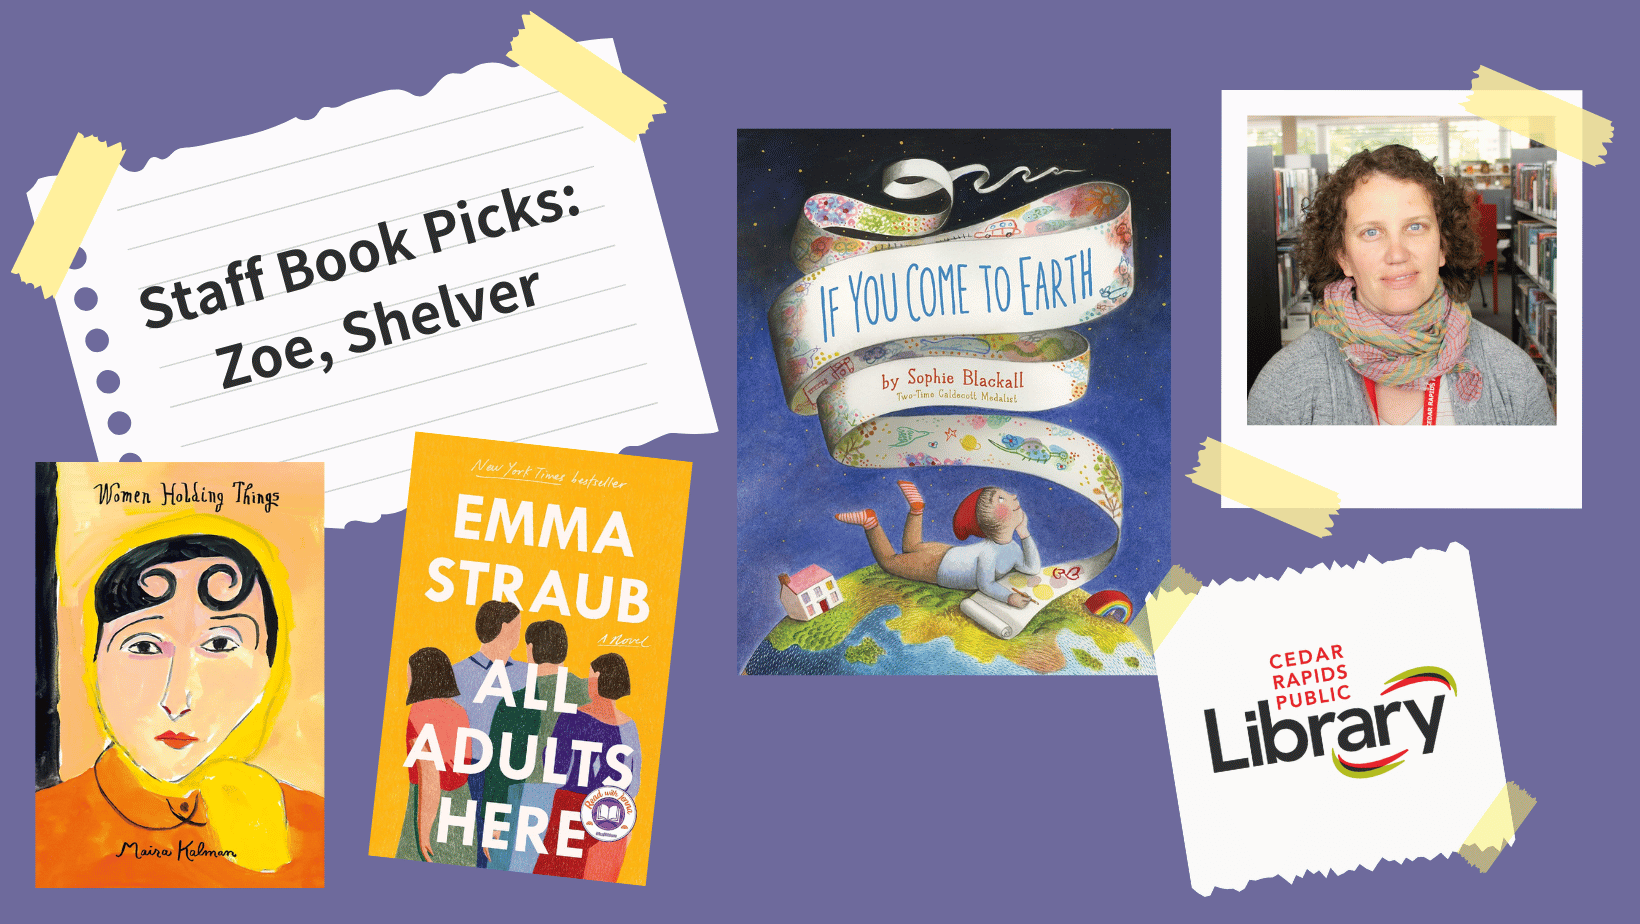 A graphic says "Staff Book Picks: Zoe, Shelver" with a photo of Zoe and three book covers: "Women Holding Things," "All Adults Here," and "If You Come to Earth."